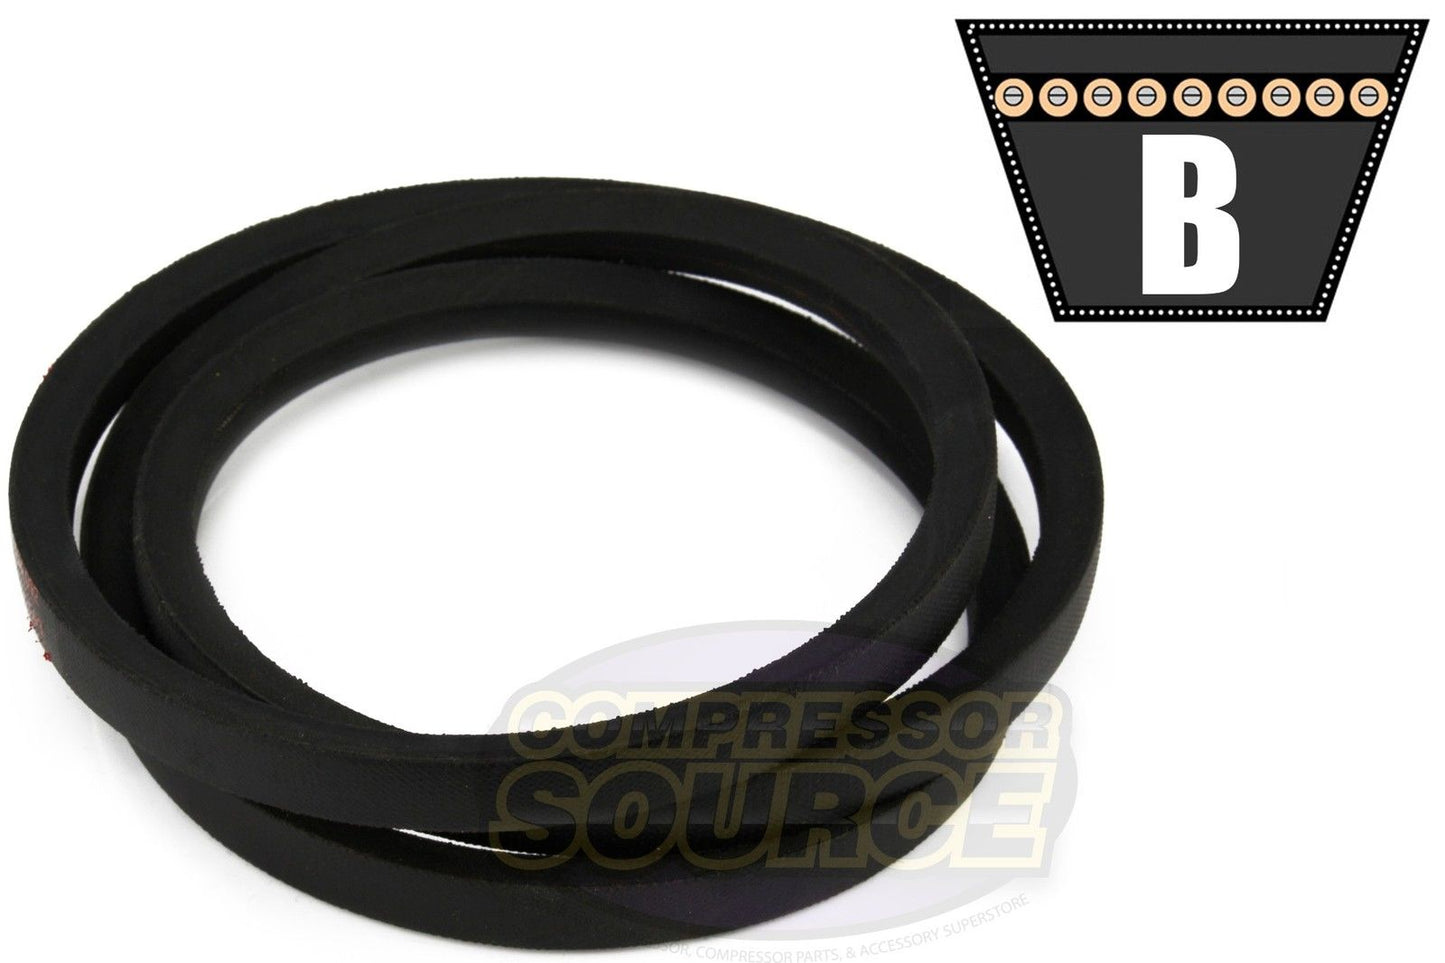 B70 Replacement High Quality Industrial & Lawn Mower 5/8" x 73"  V Belt 5L730